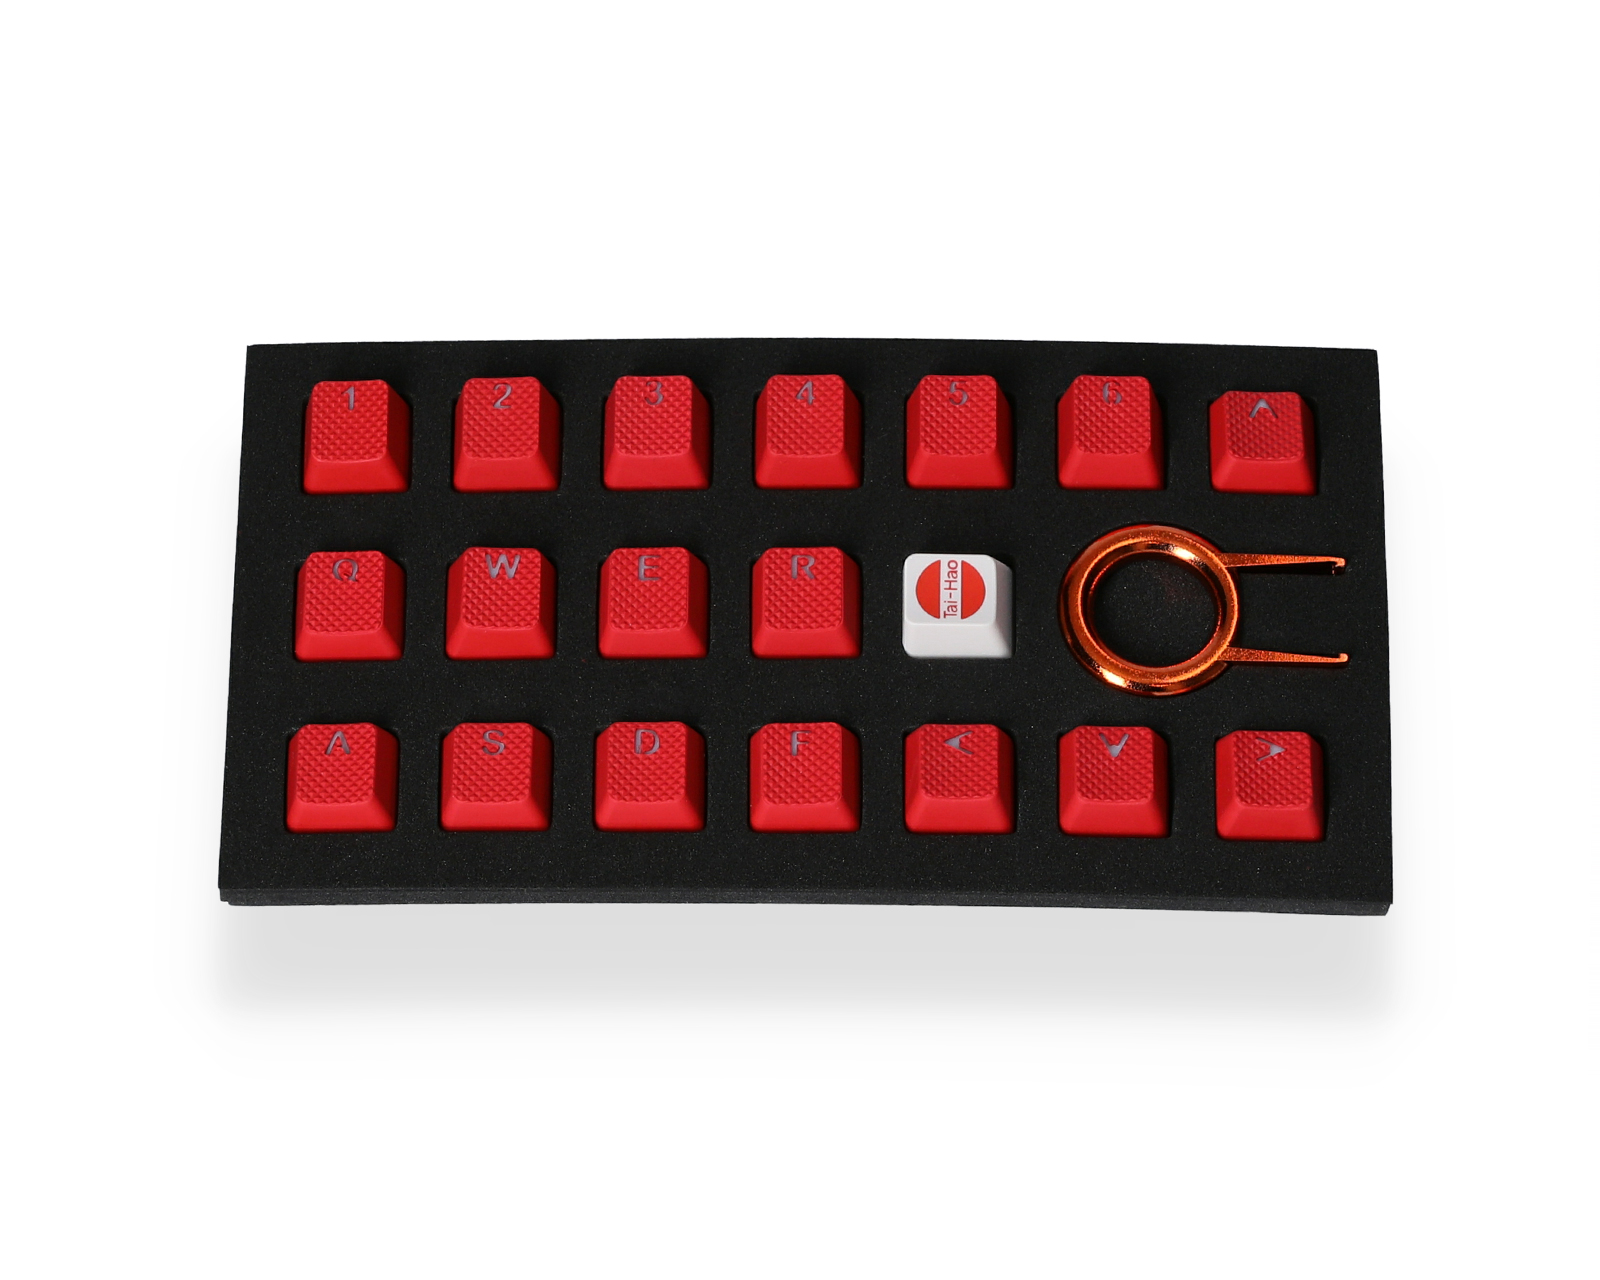 TaiHao Rubber Backlit Gaming Keycap Set Doubleshot Keycaps Cherry MX Suitable 